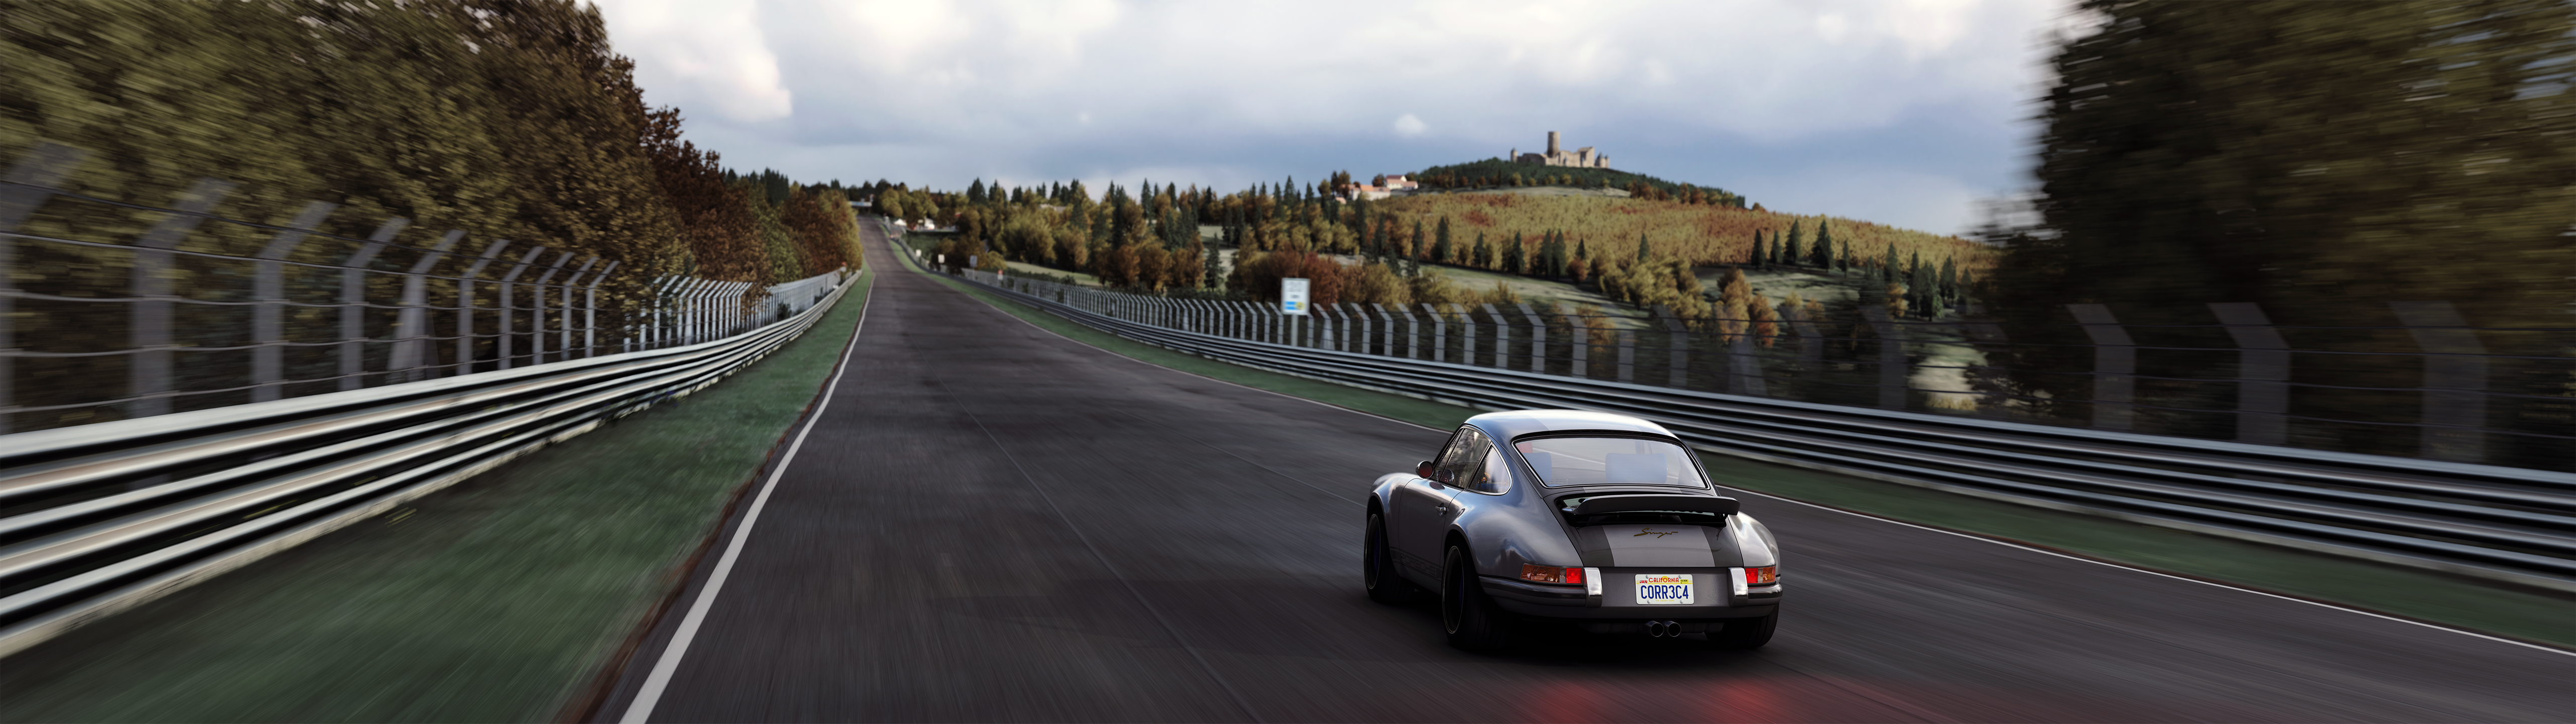 Nurburgring Porsche 911 Singer Assetto Corsa Car Video Games Licence Plates Road Taillights 5120x1440